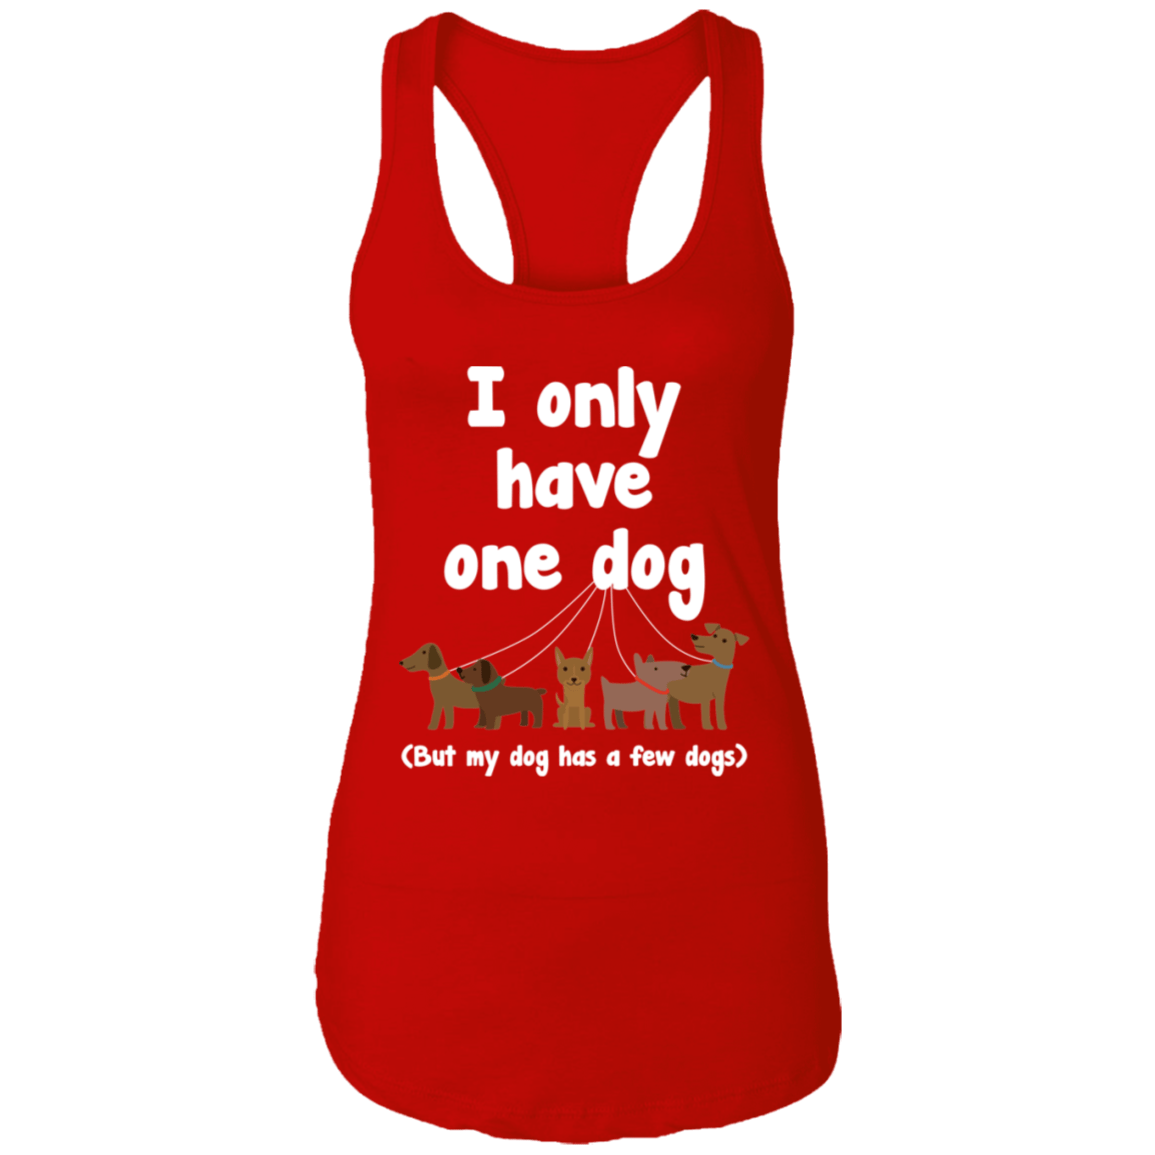 I Only Have One Dog - Ladies Racer Back Tank.